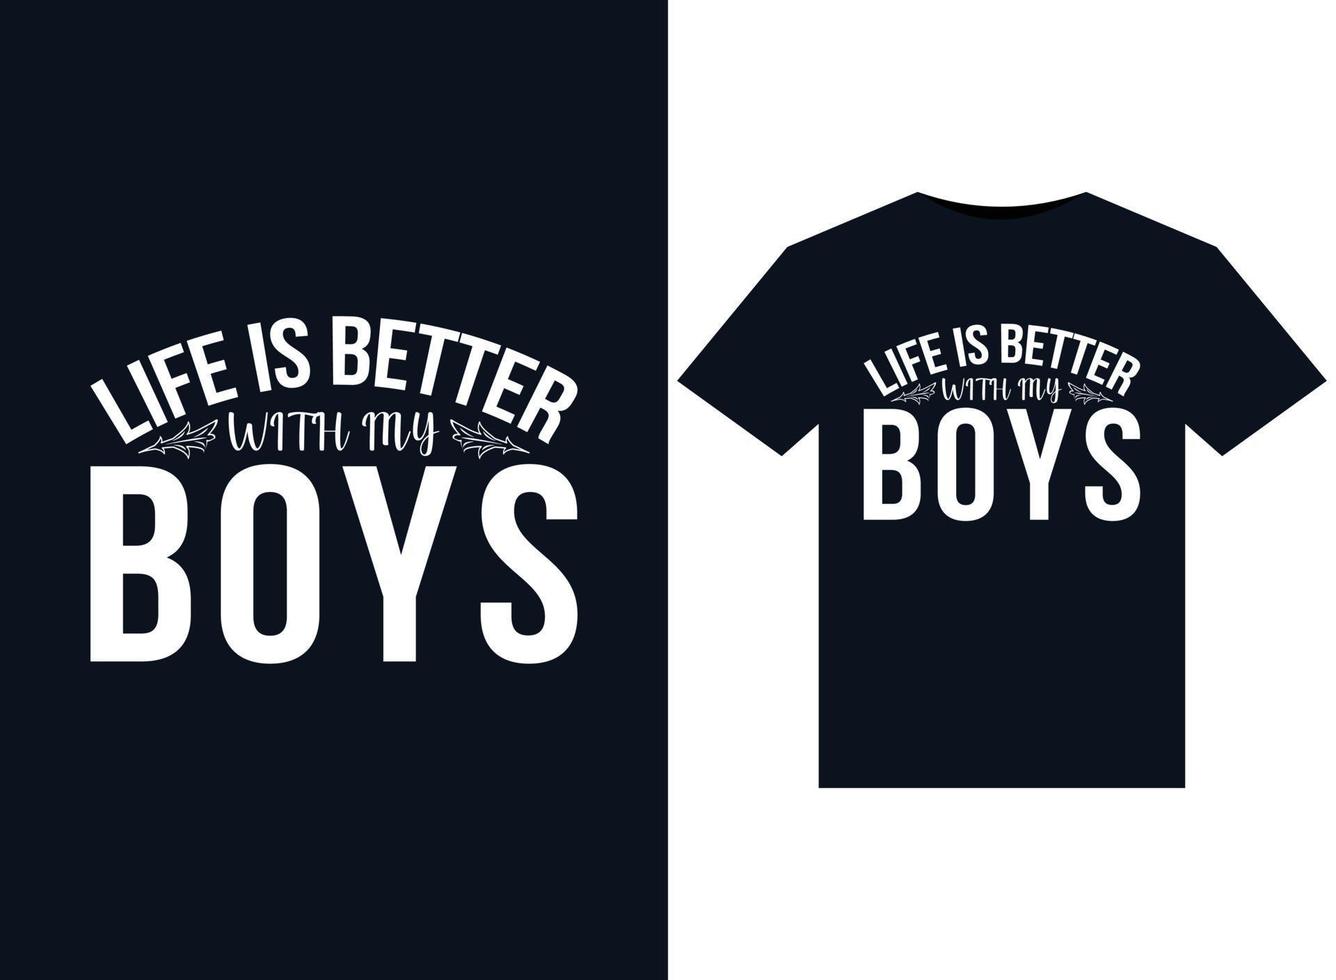 life is better with my boys illustrations for print-ready t-shirts design vektor